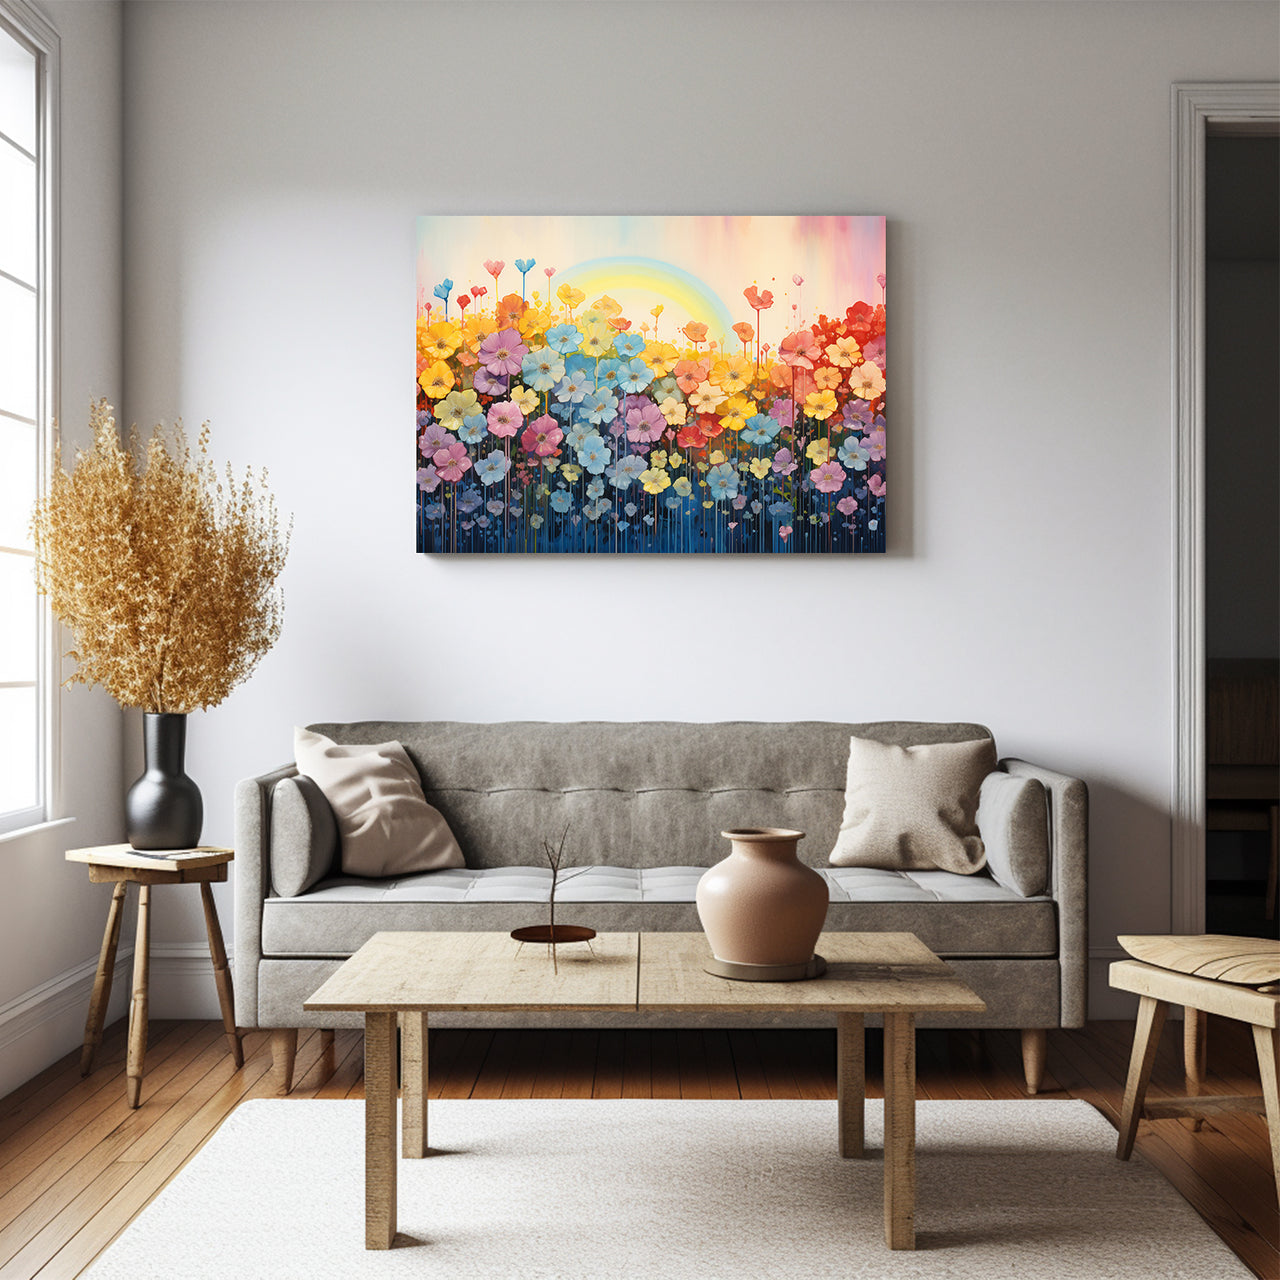 Wildflowers on Canvas, Colorful Wildflower Field Art Print 02, Minimalist Flower Wall Art, Abstract Wall Art, Watercolor flowers, Floral Print, Classic, Rustic Farmhouse, Wildflower Home Decor, Flower Painting Canvas, Floral Wall Art